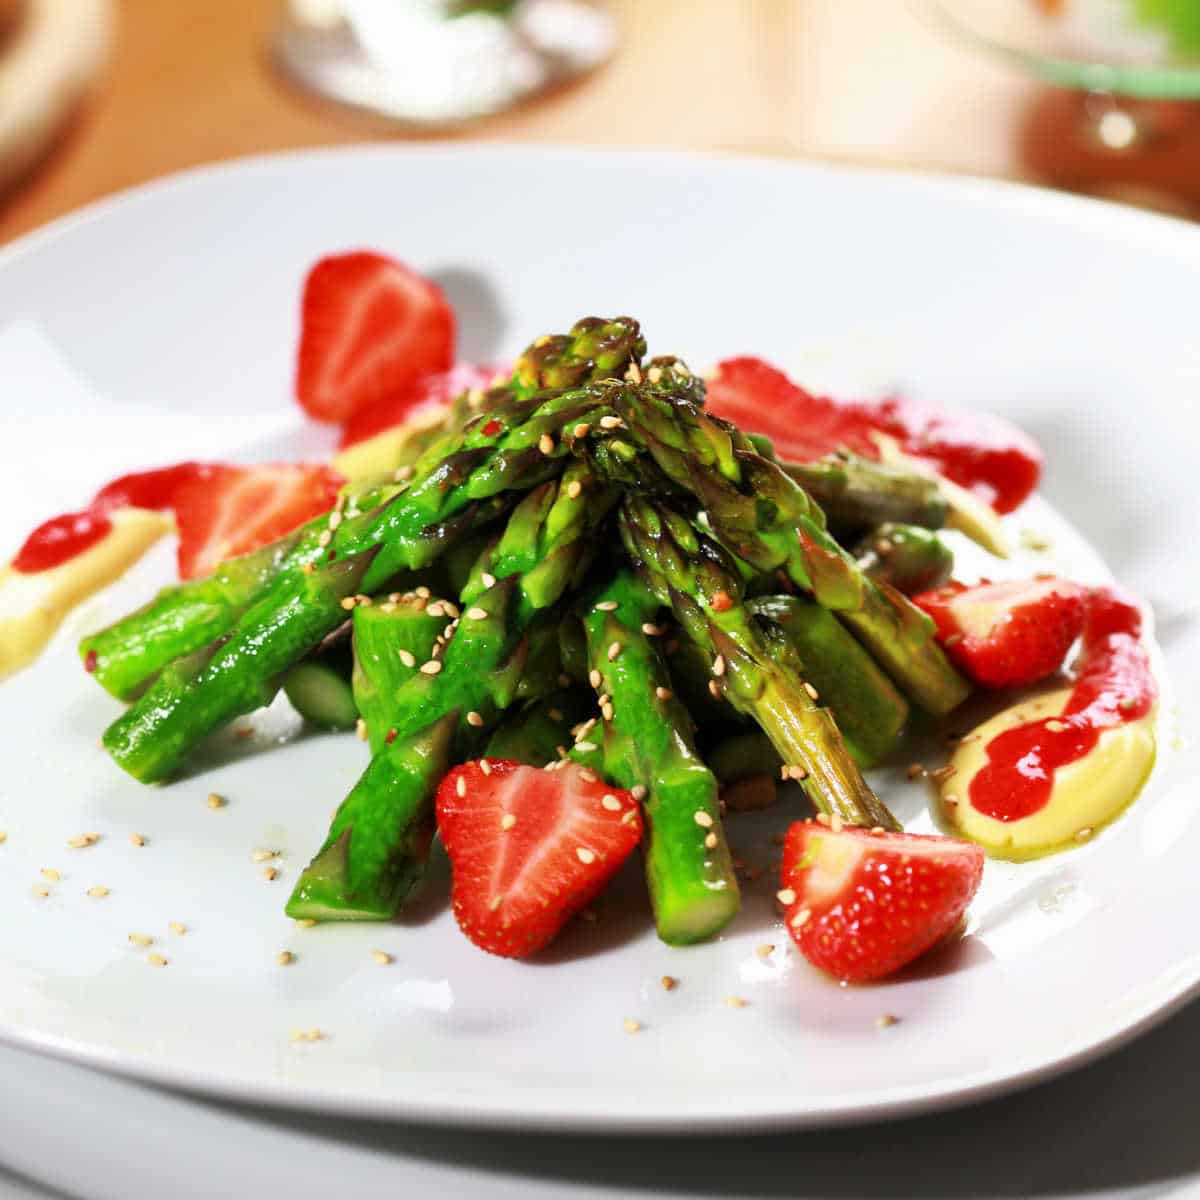 Sugared asparagus with strawberries, strawberry syrup and sesame seeds on a white plate